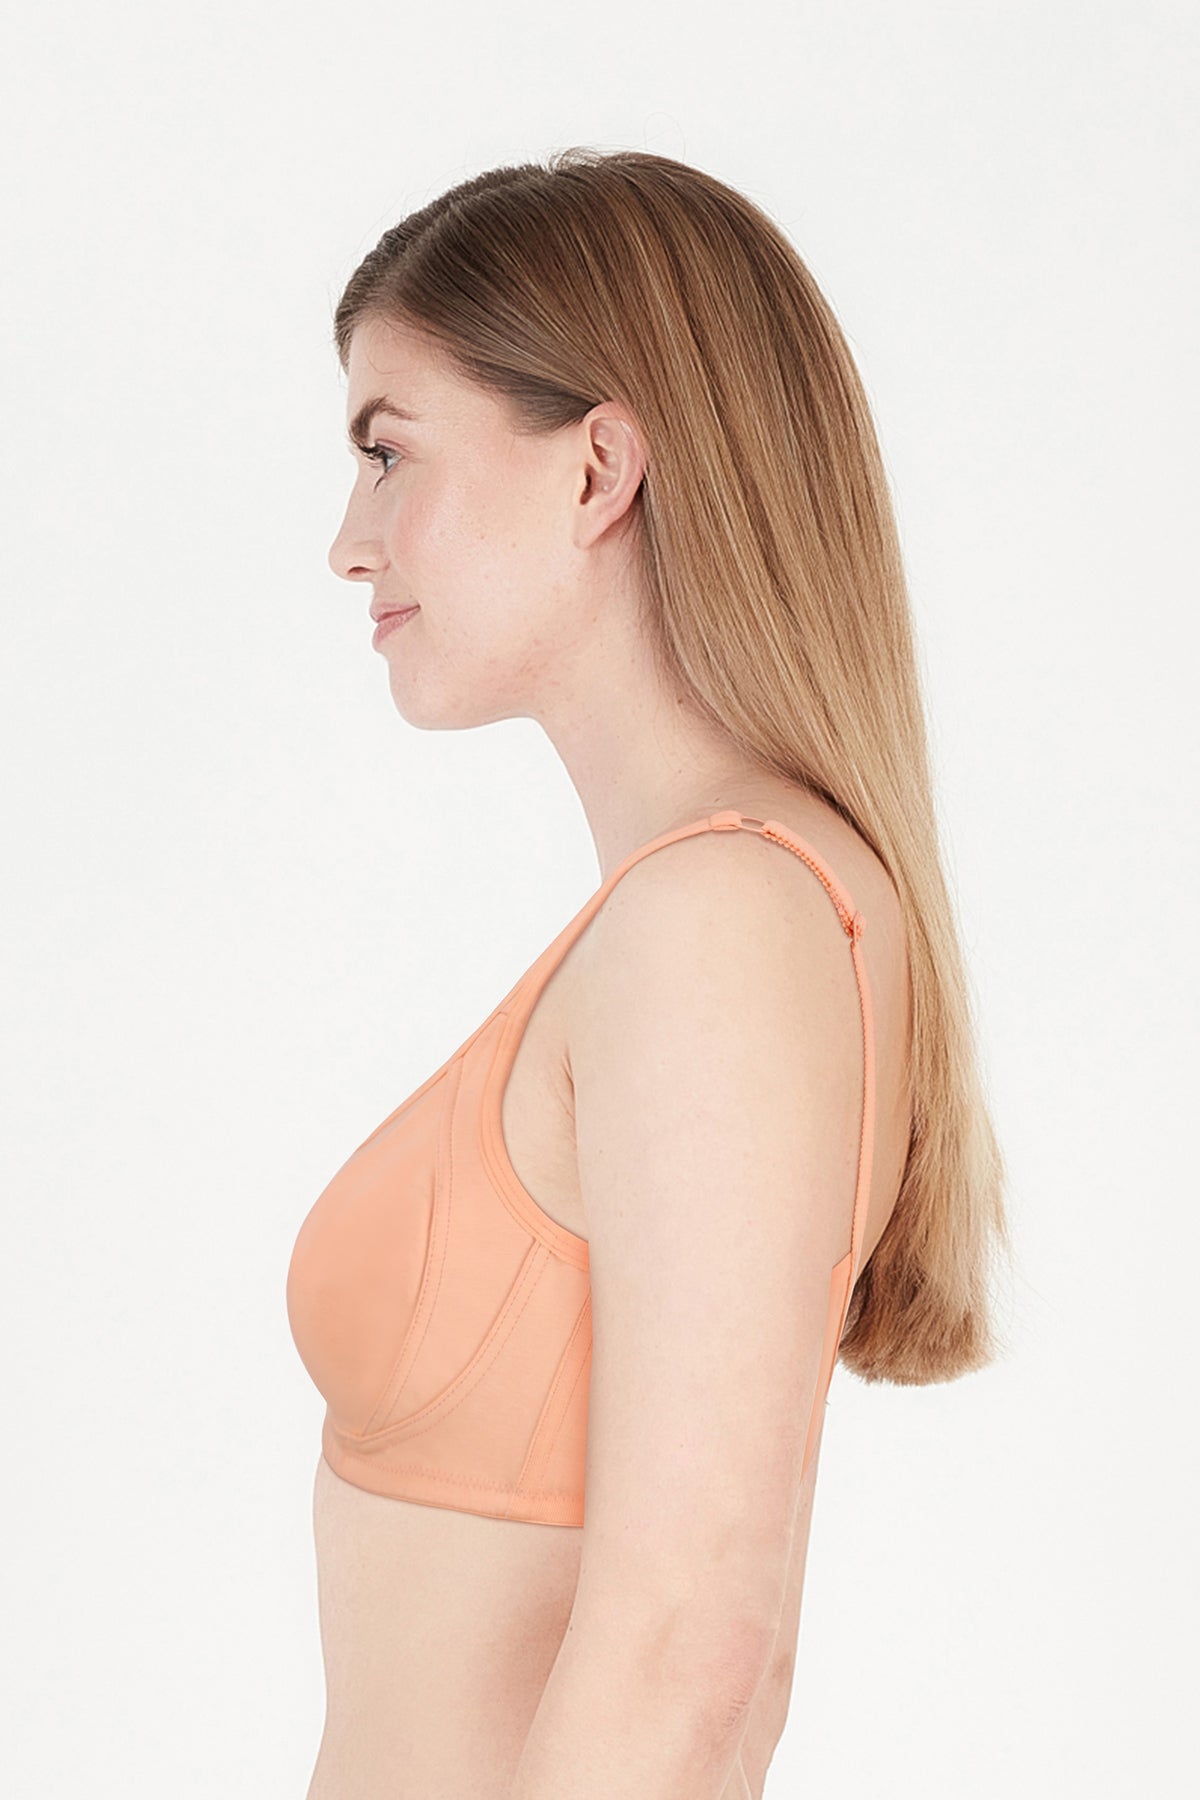 BLS - Calantha Non Wired And Non Padded Cotton Bra - Salmon